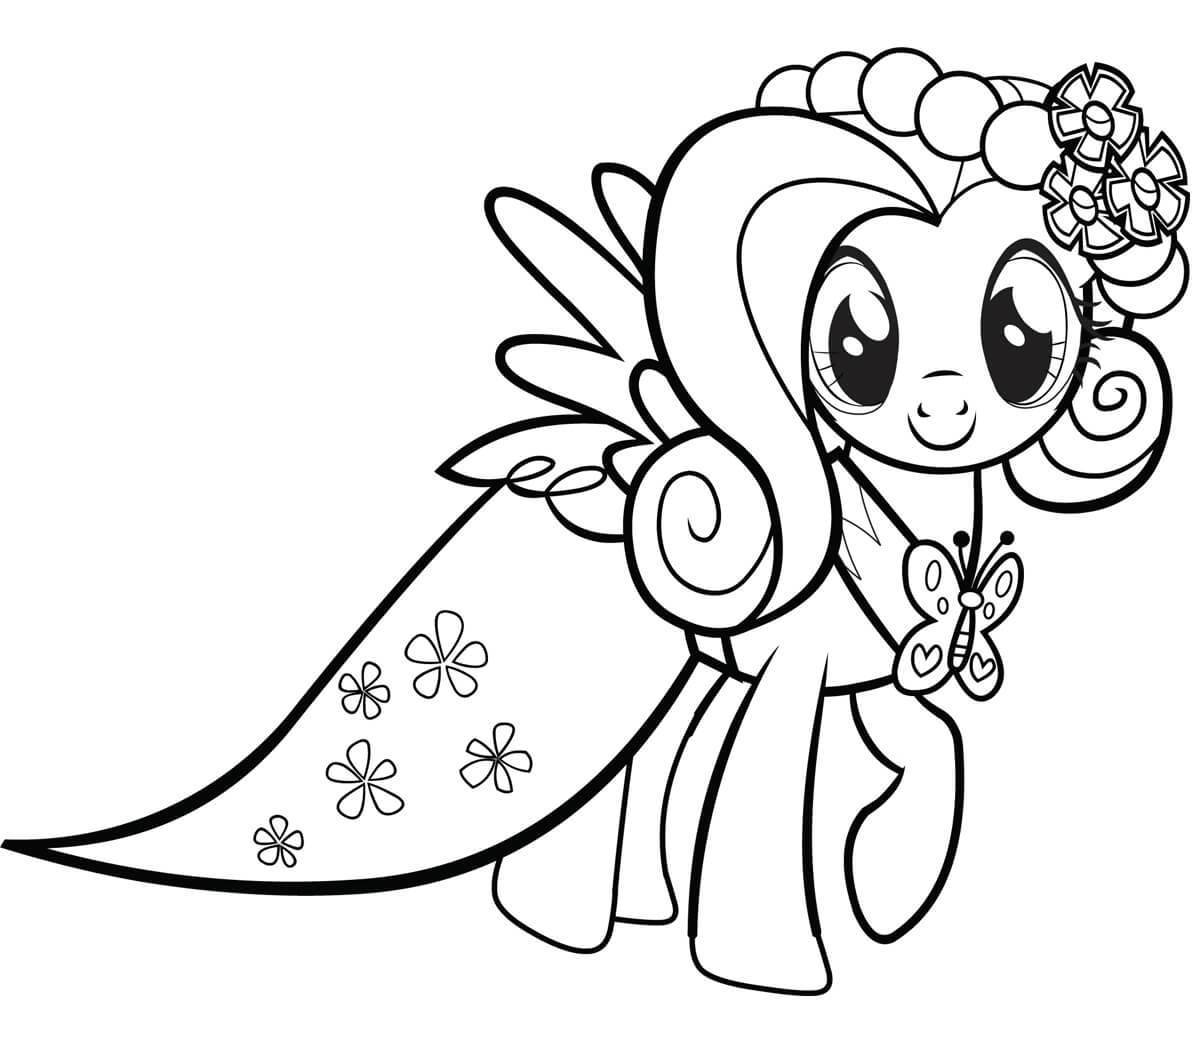 Exquisite fluttershy coloring book